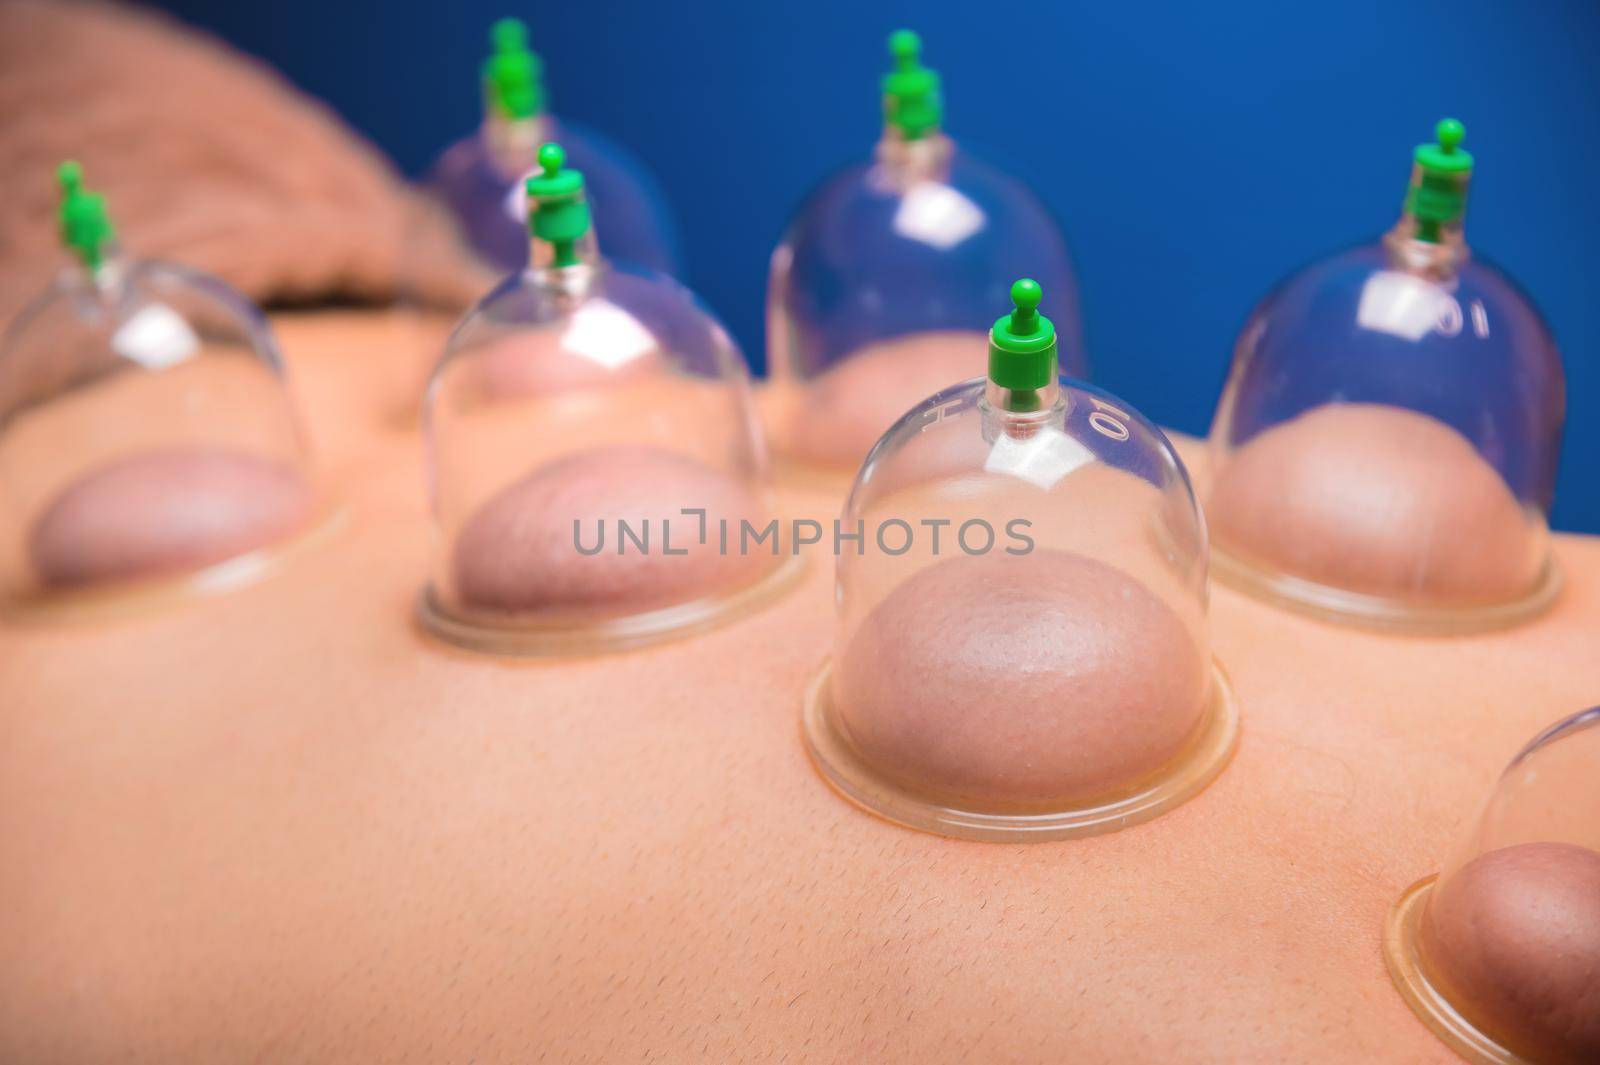 Man lying down recovering health with vacuum cups. Close-up of vacuum cups on the back of a man against a black-blue background. Traditional oriental medicine